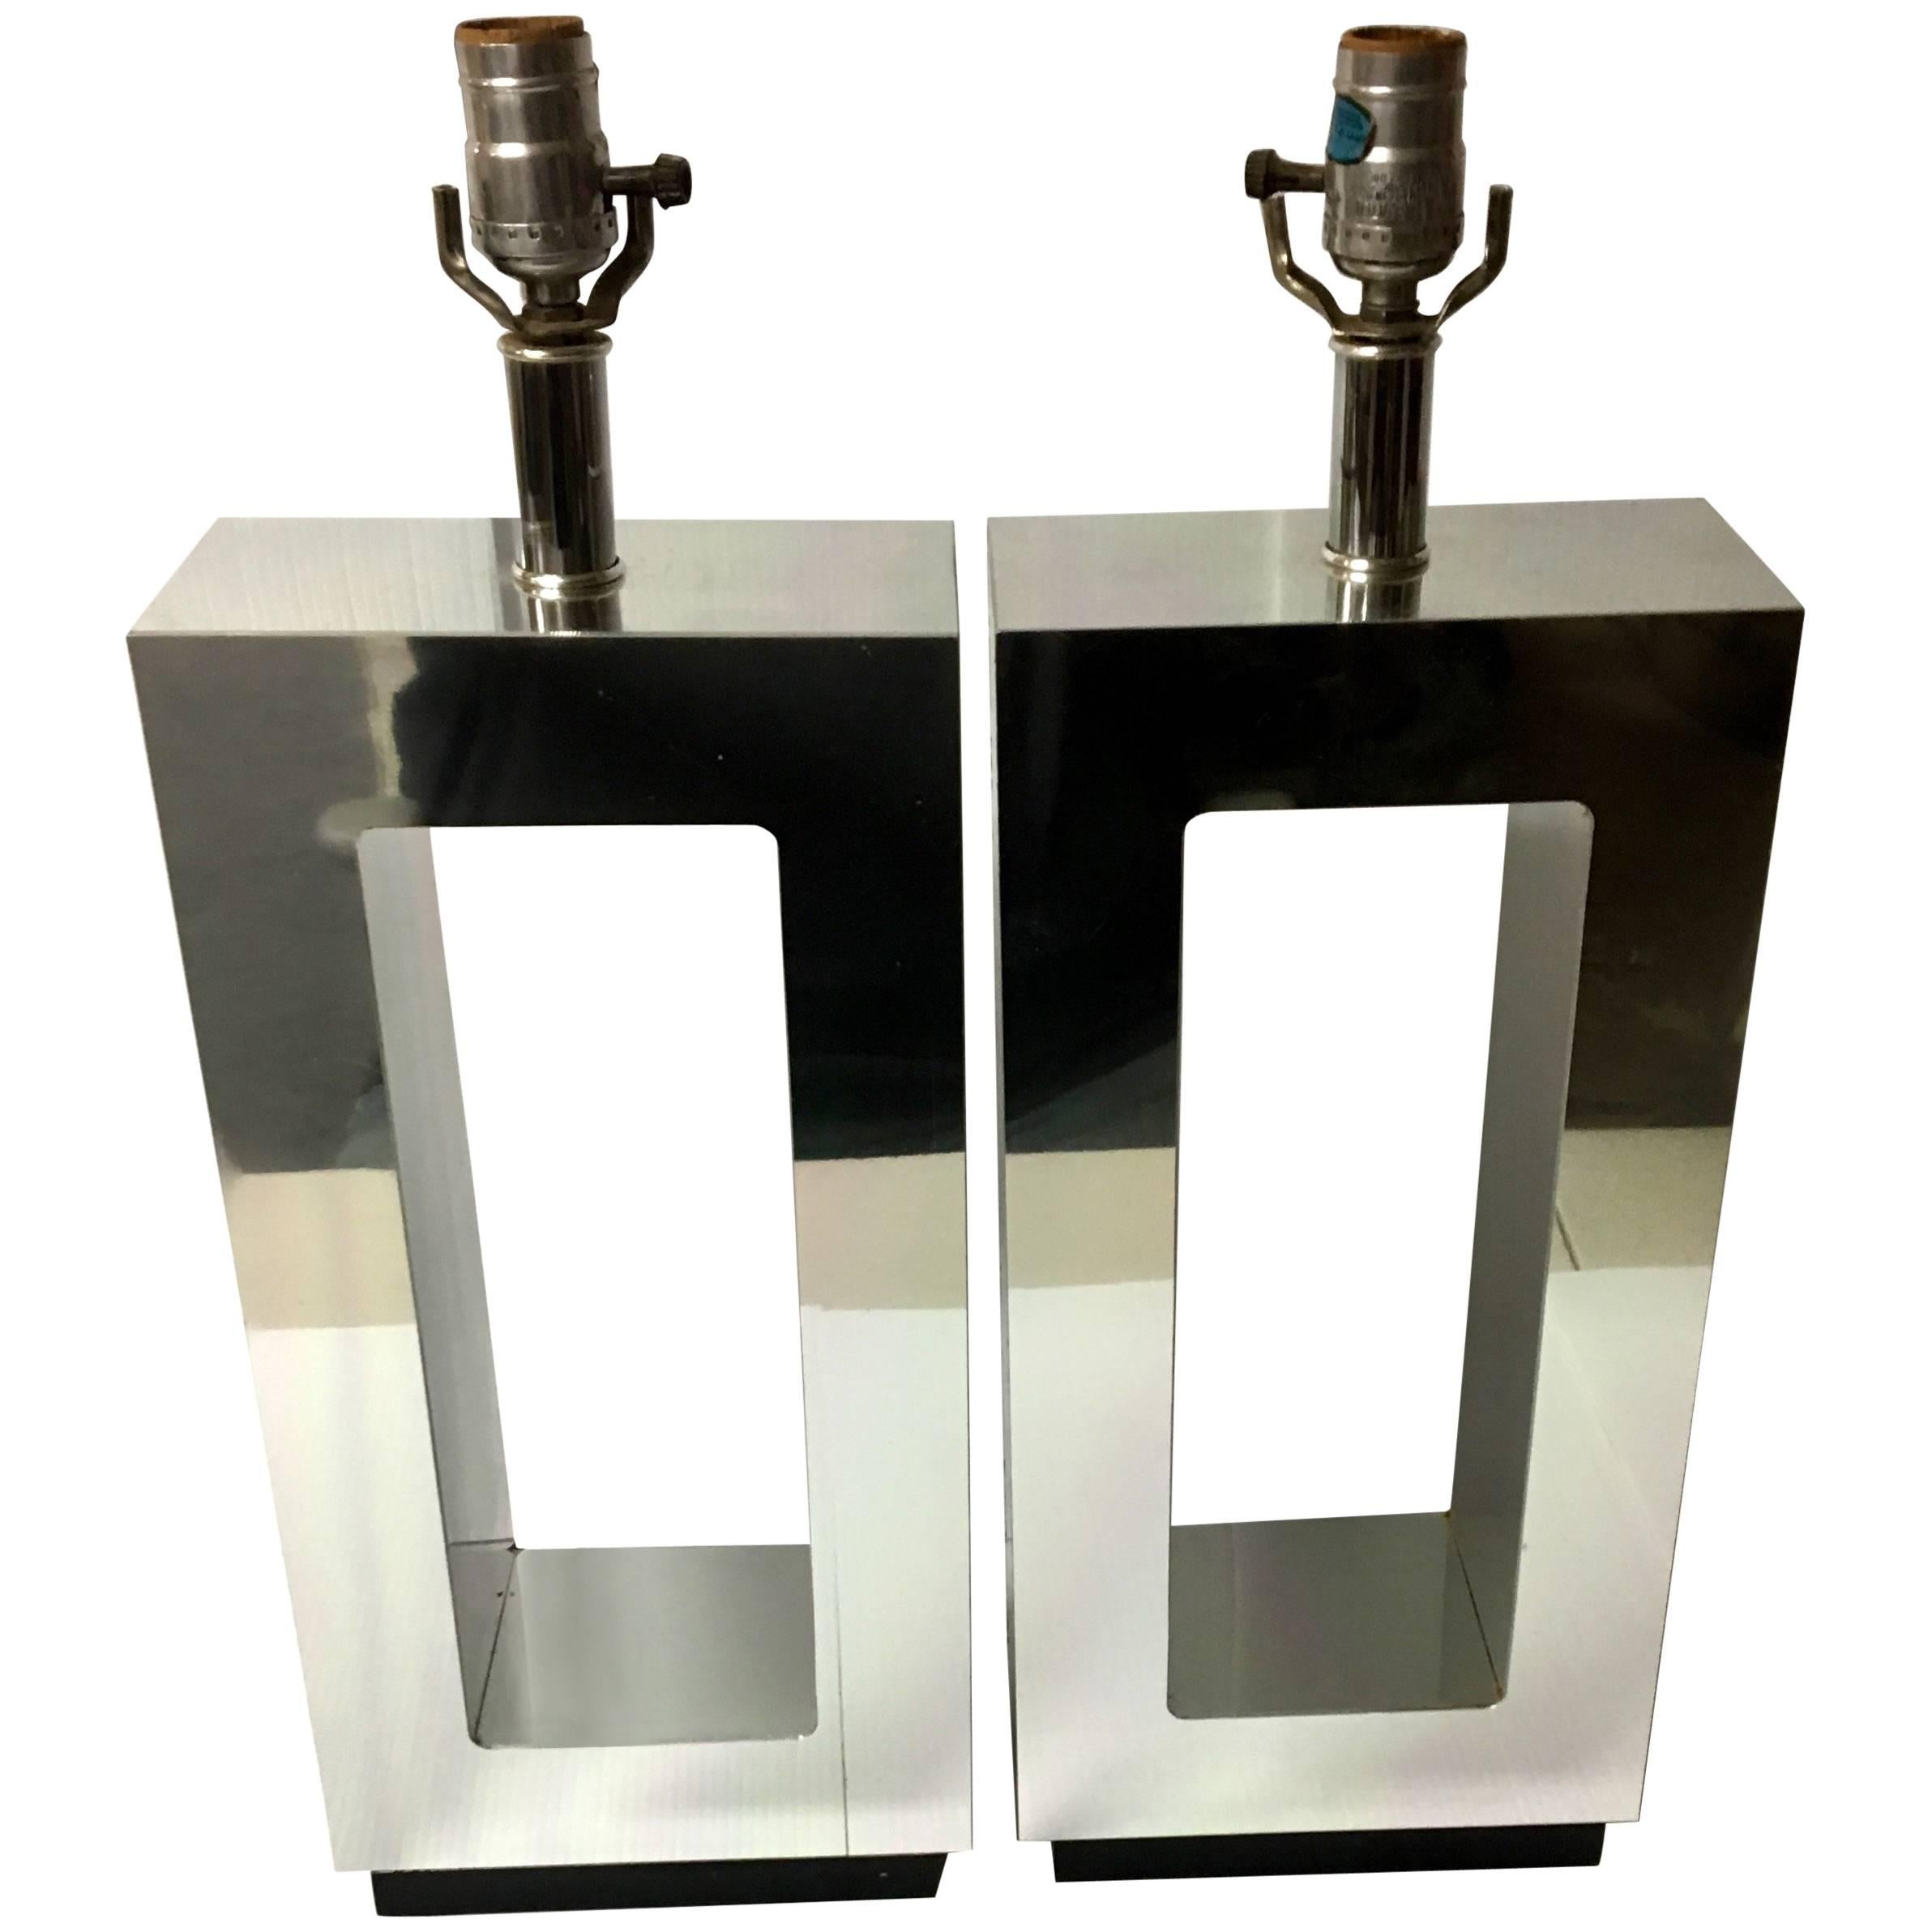 Pair of Mirrored Geometric Table Lamps in the Style of Milo Baughman, 1970s